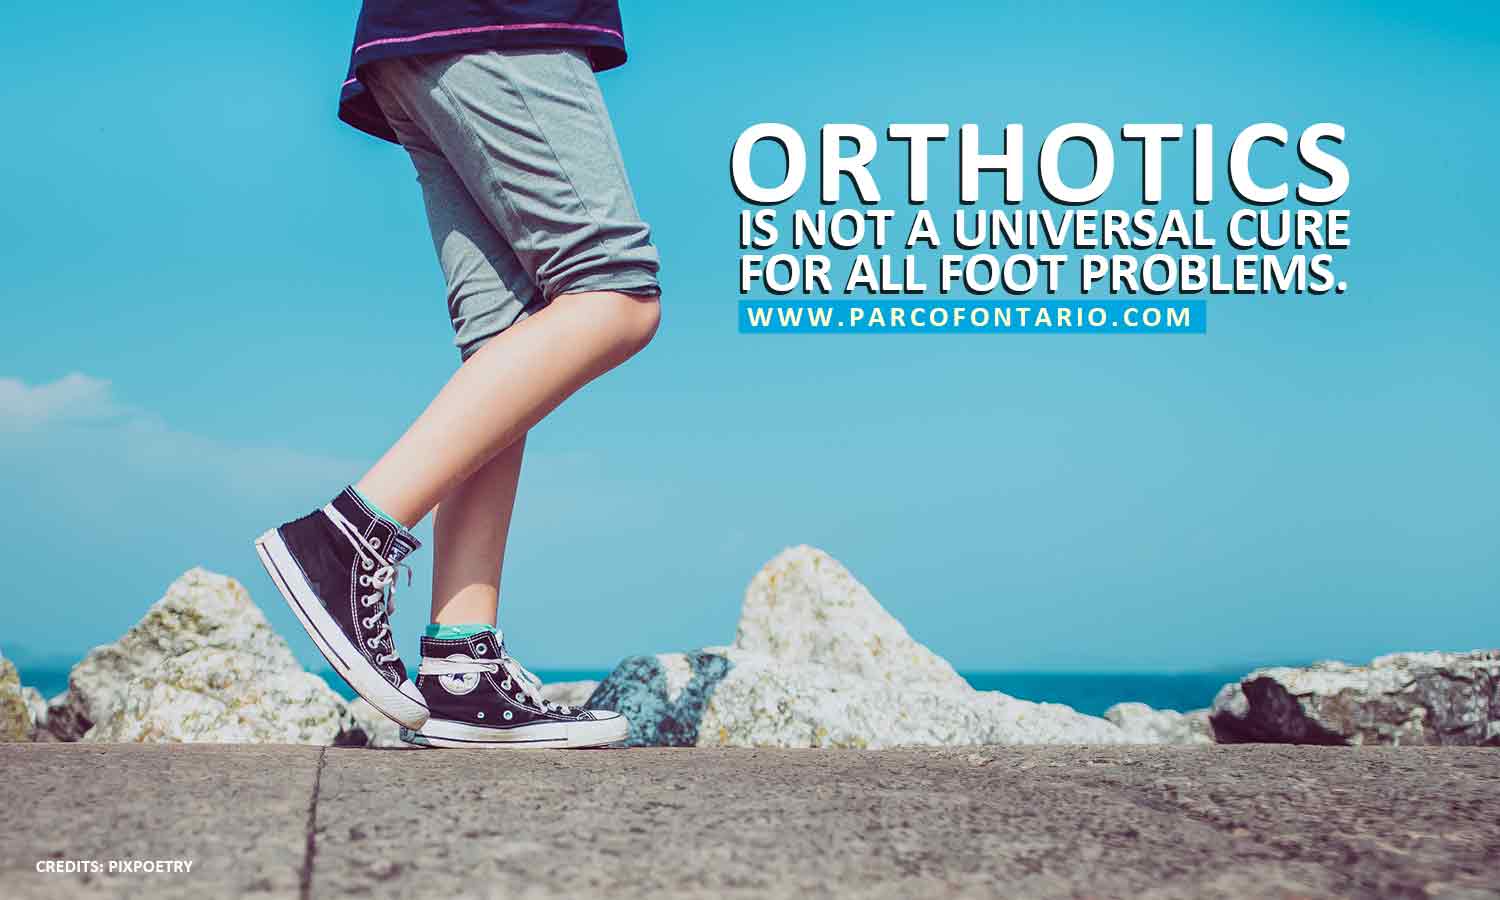 Orthotics is not a universal cure